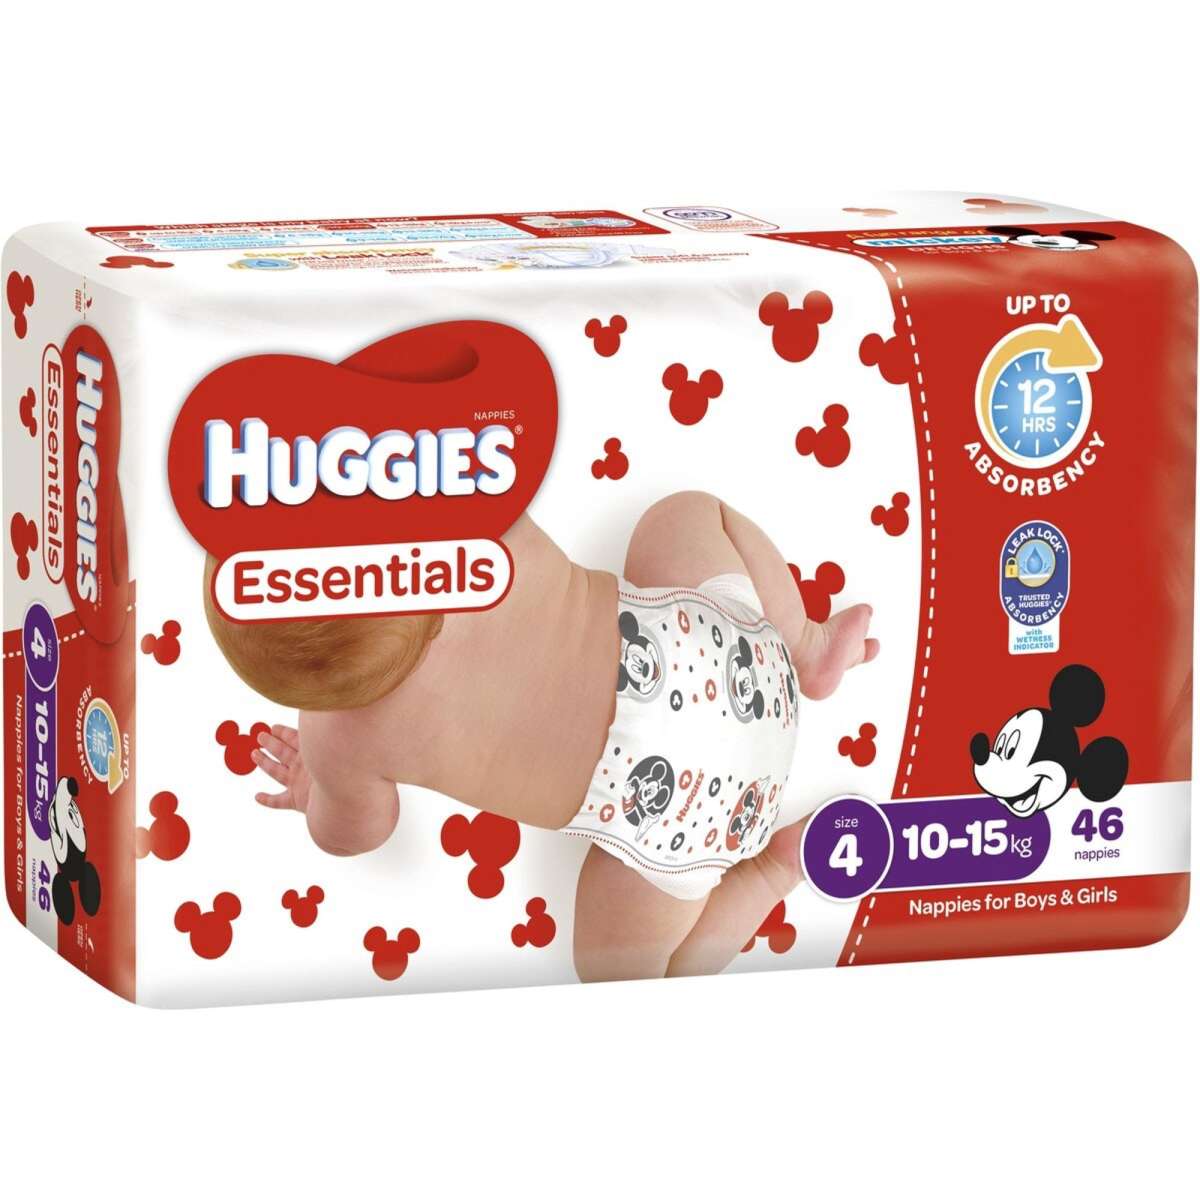 Huggies Essentials Nappies Size 4 Toddler 10-15Kg 46 Pack